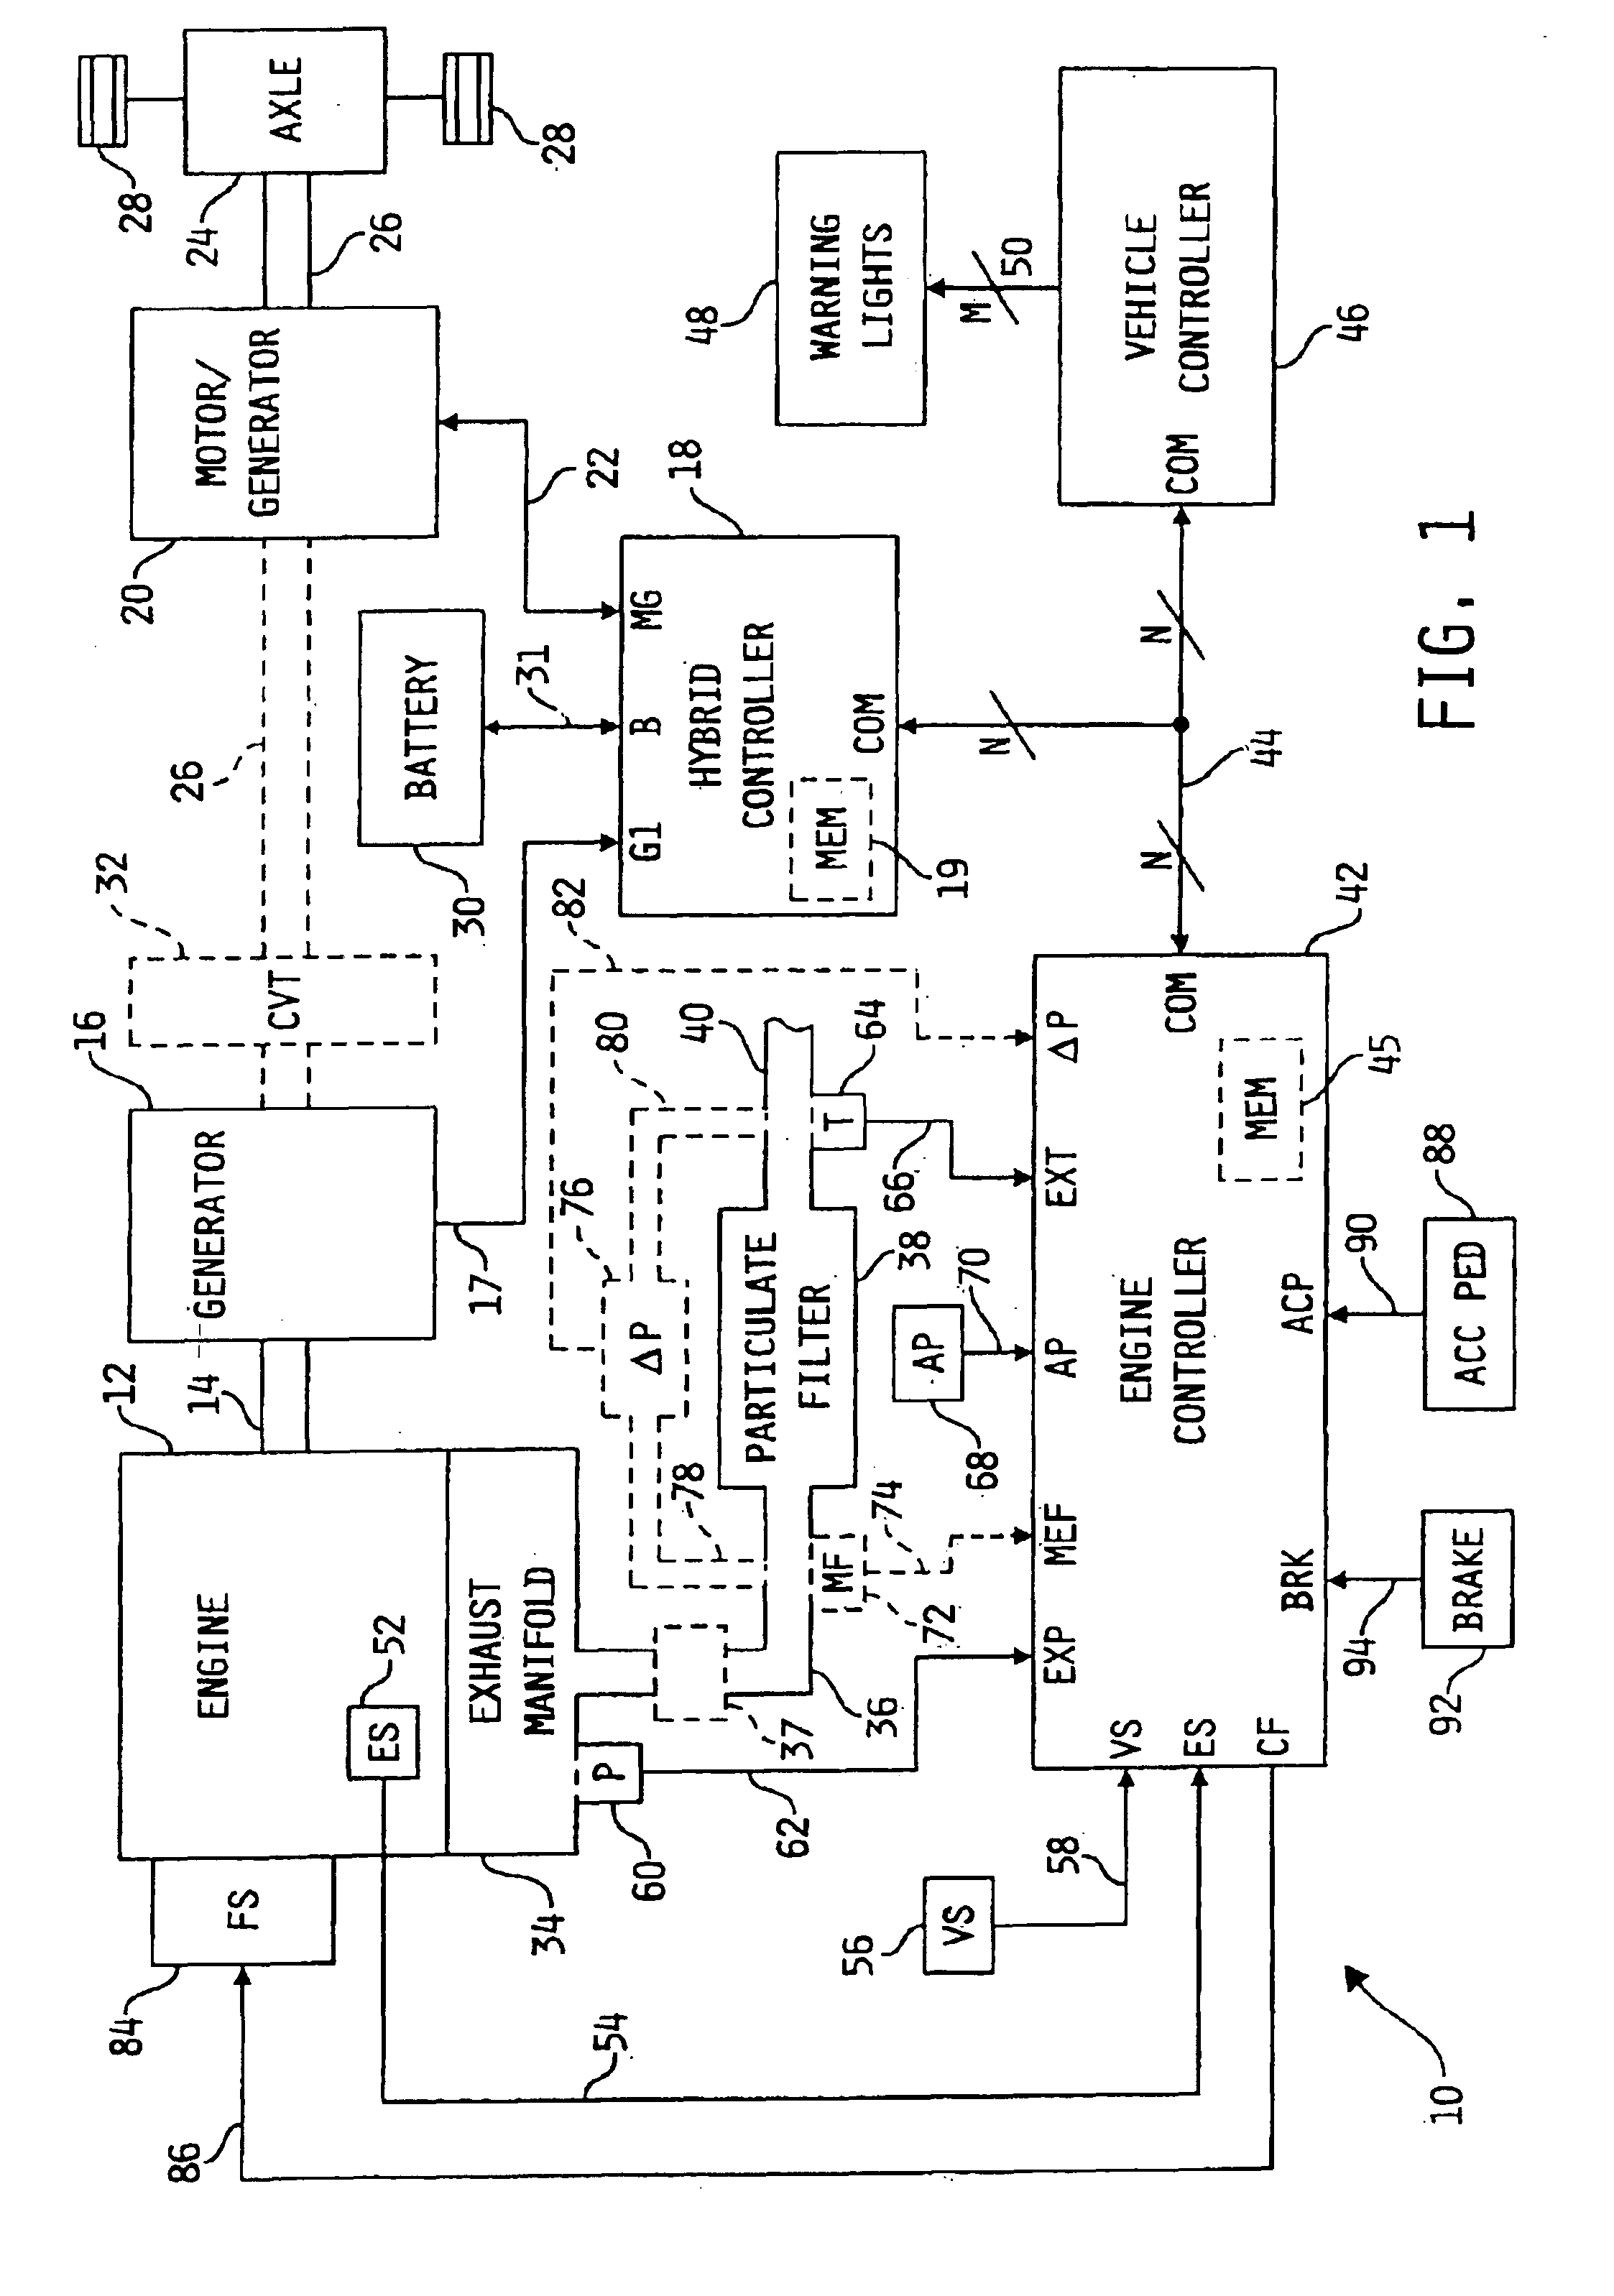 System for controlling particulate filter temperature